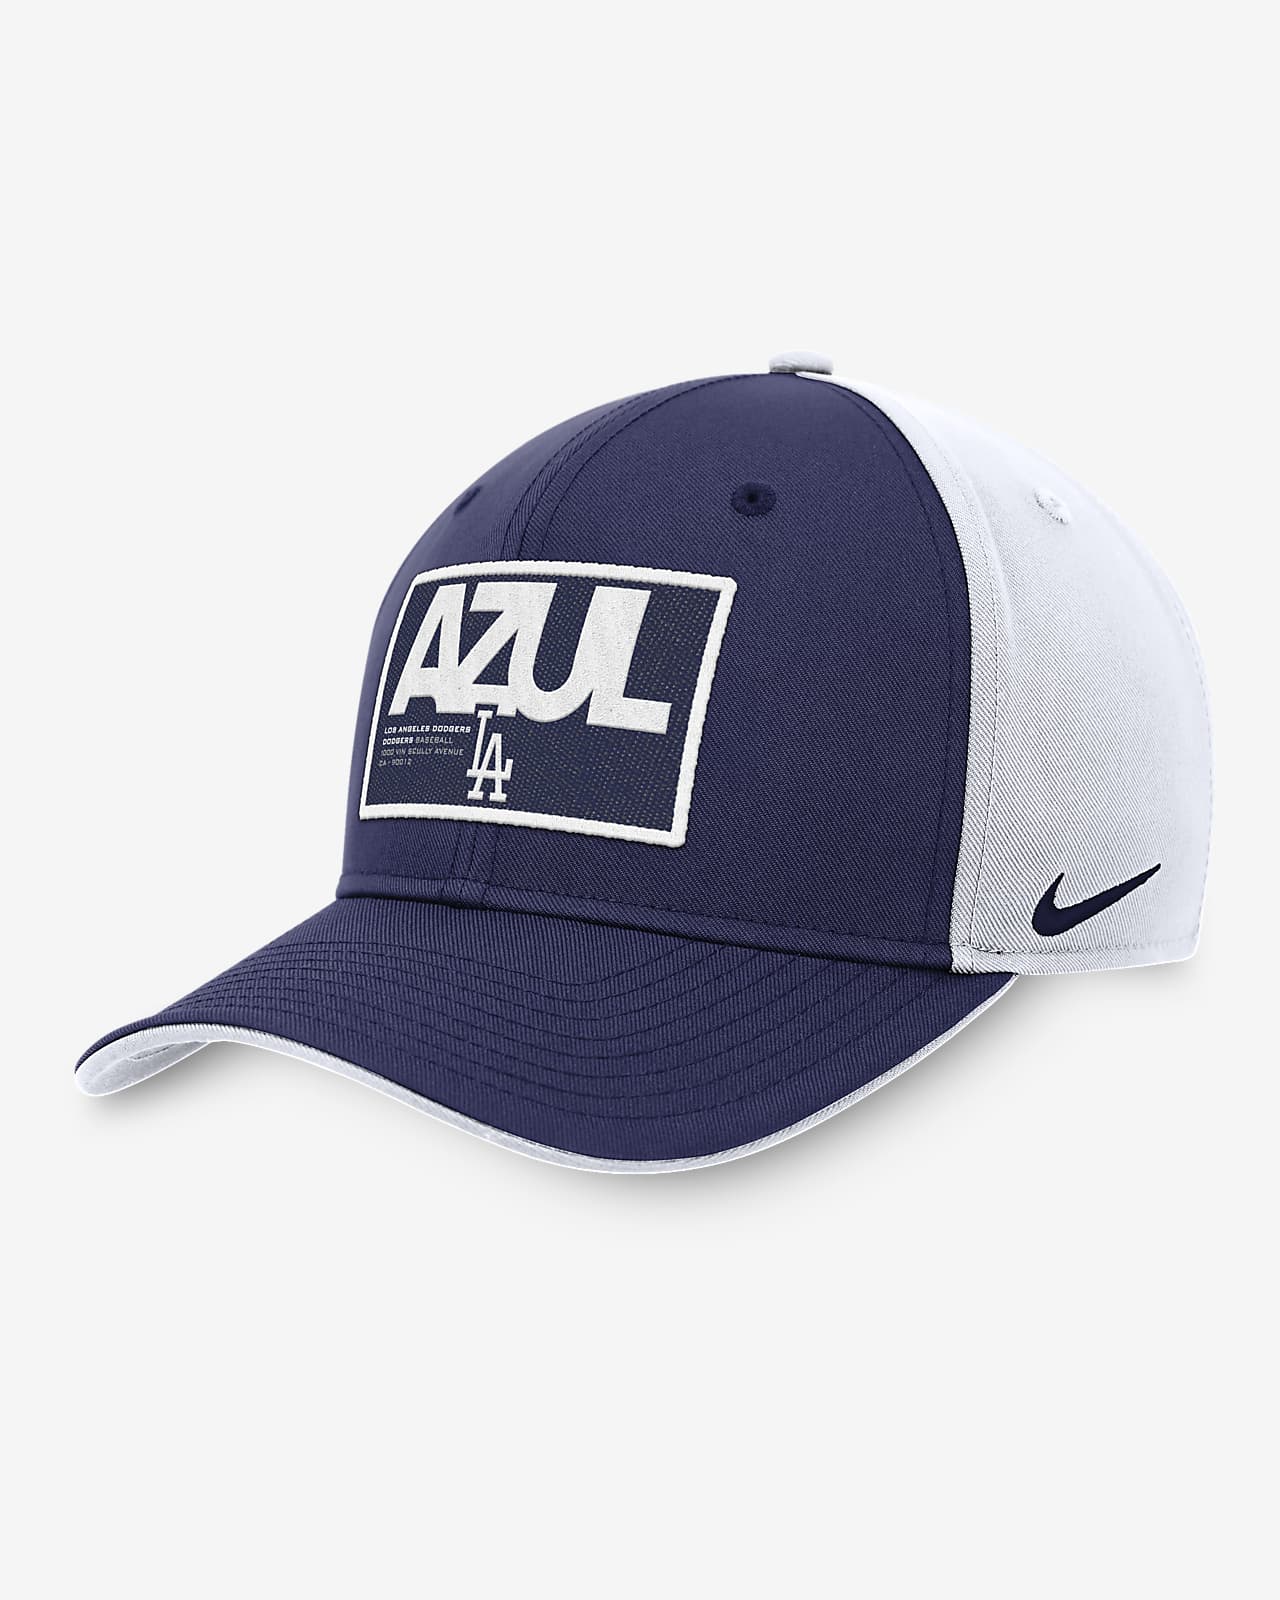 Buy LA Dodgers Youth Baseball Cap Baseball Hat Youth Dodgers Online in  India 